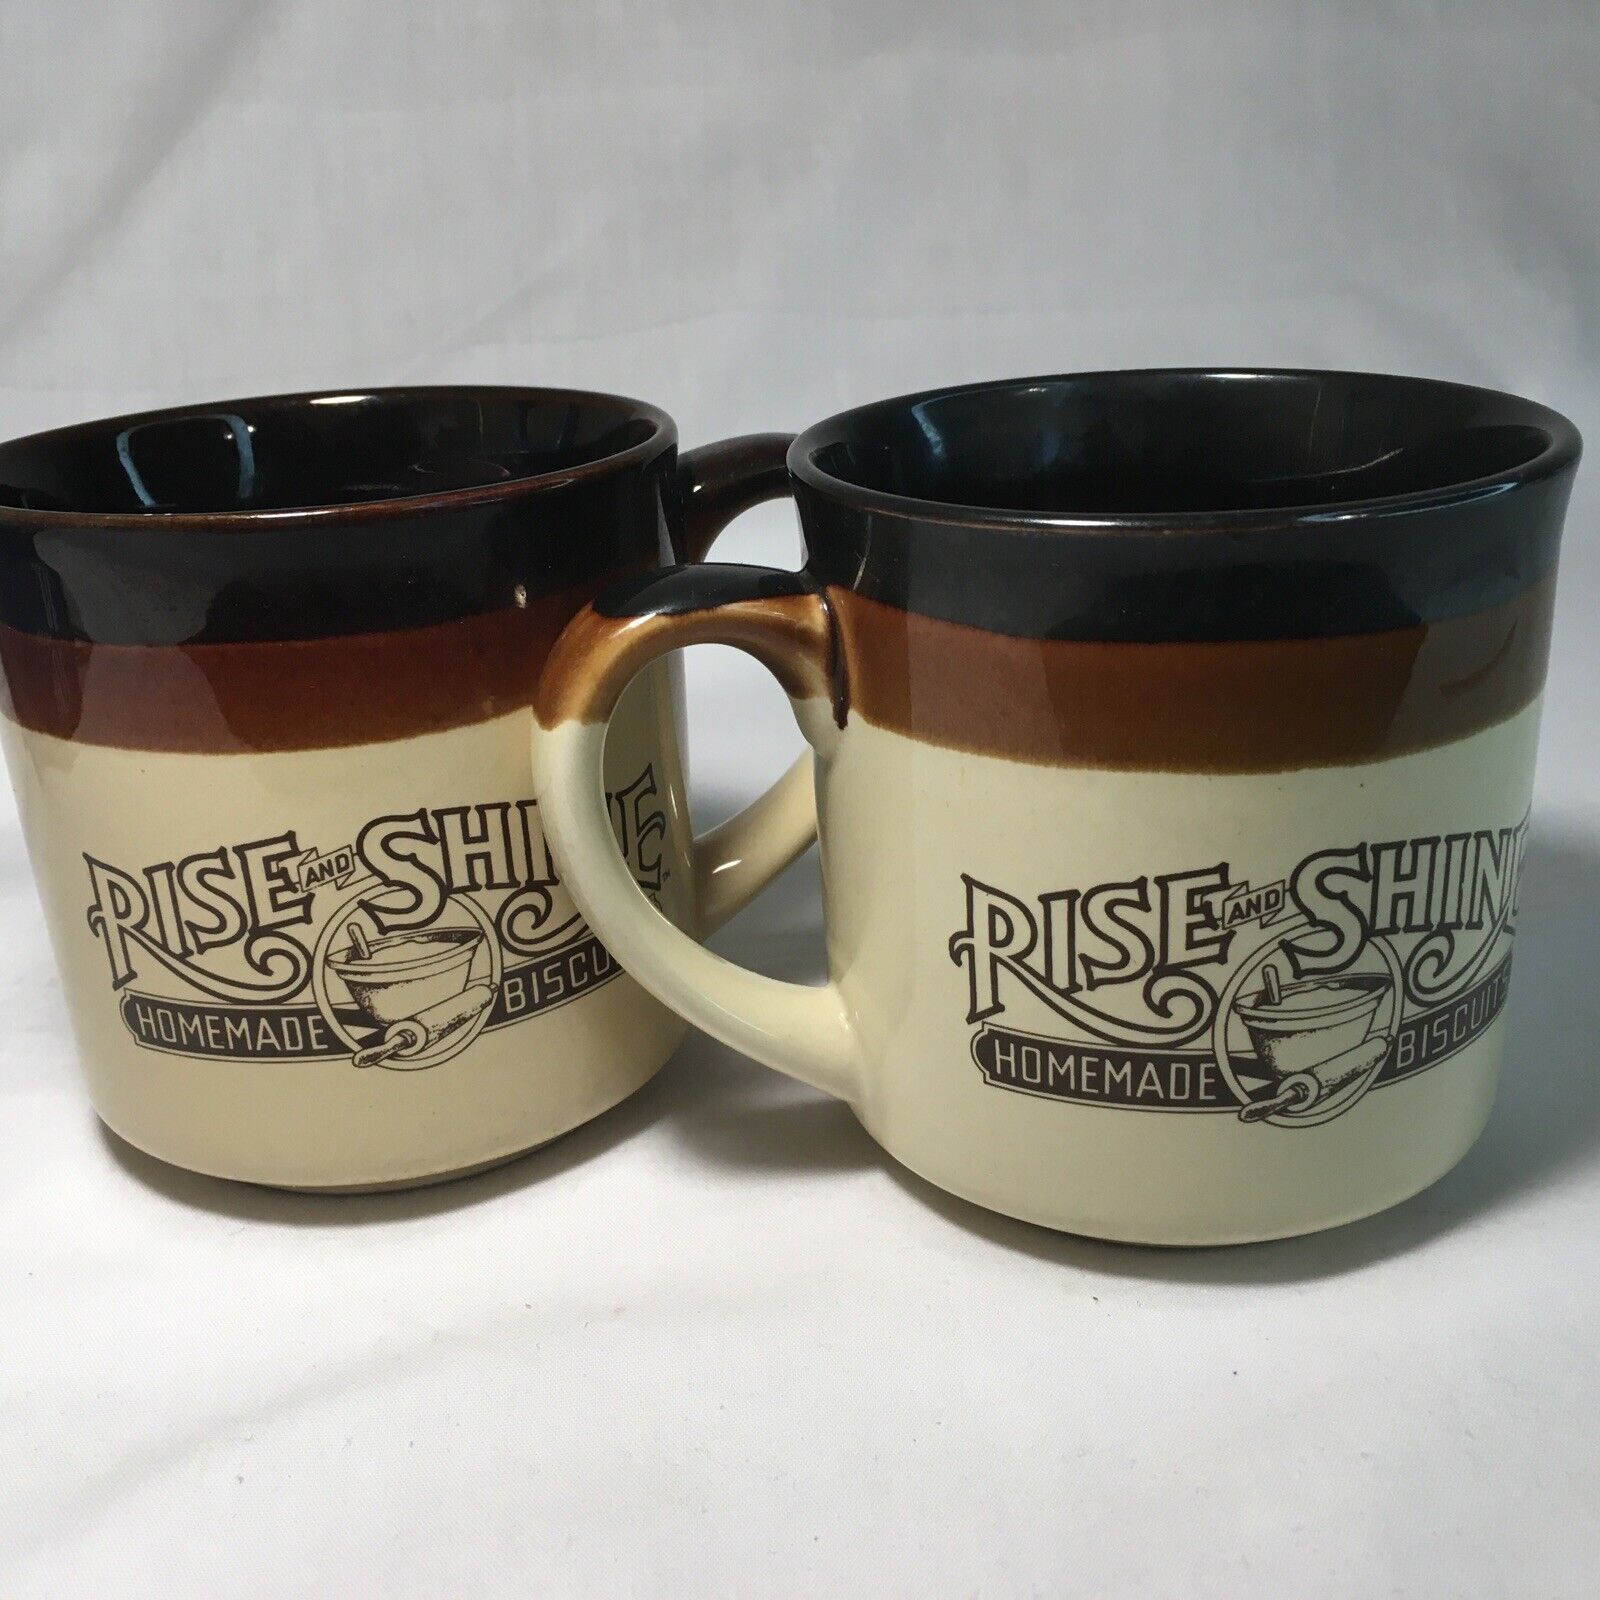 2 Vintage Hardee’s Rise and Shine Homemade Biscuits Mug 11 oz, 3.5” Tall  1986